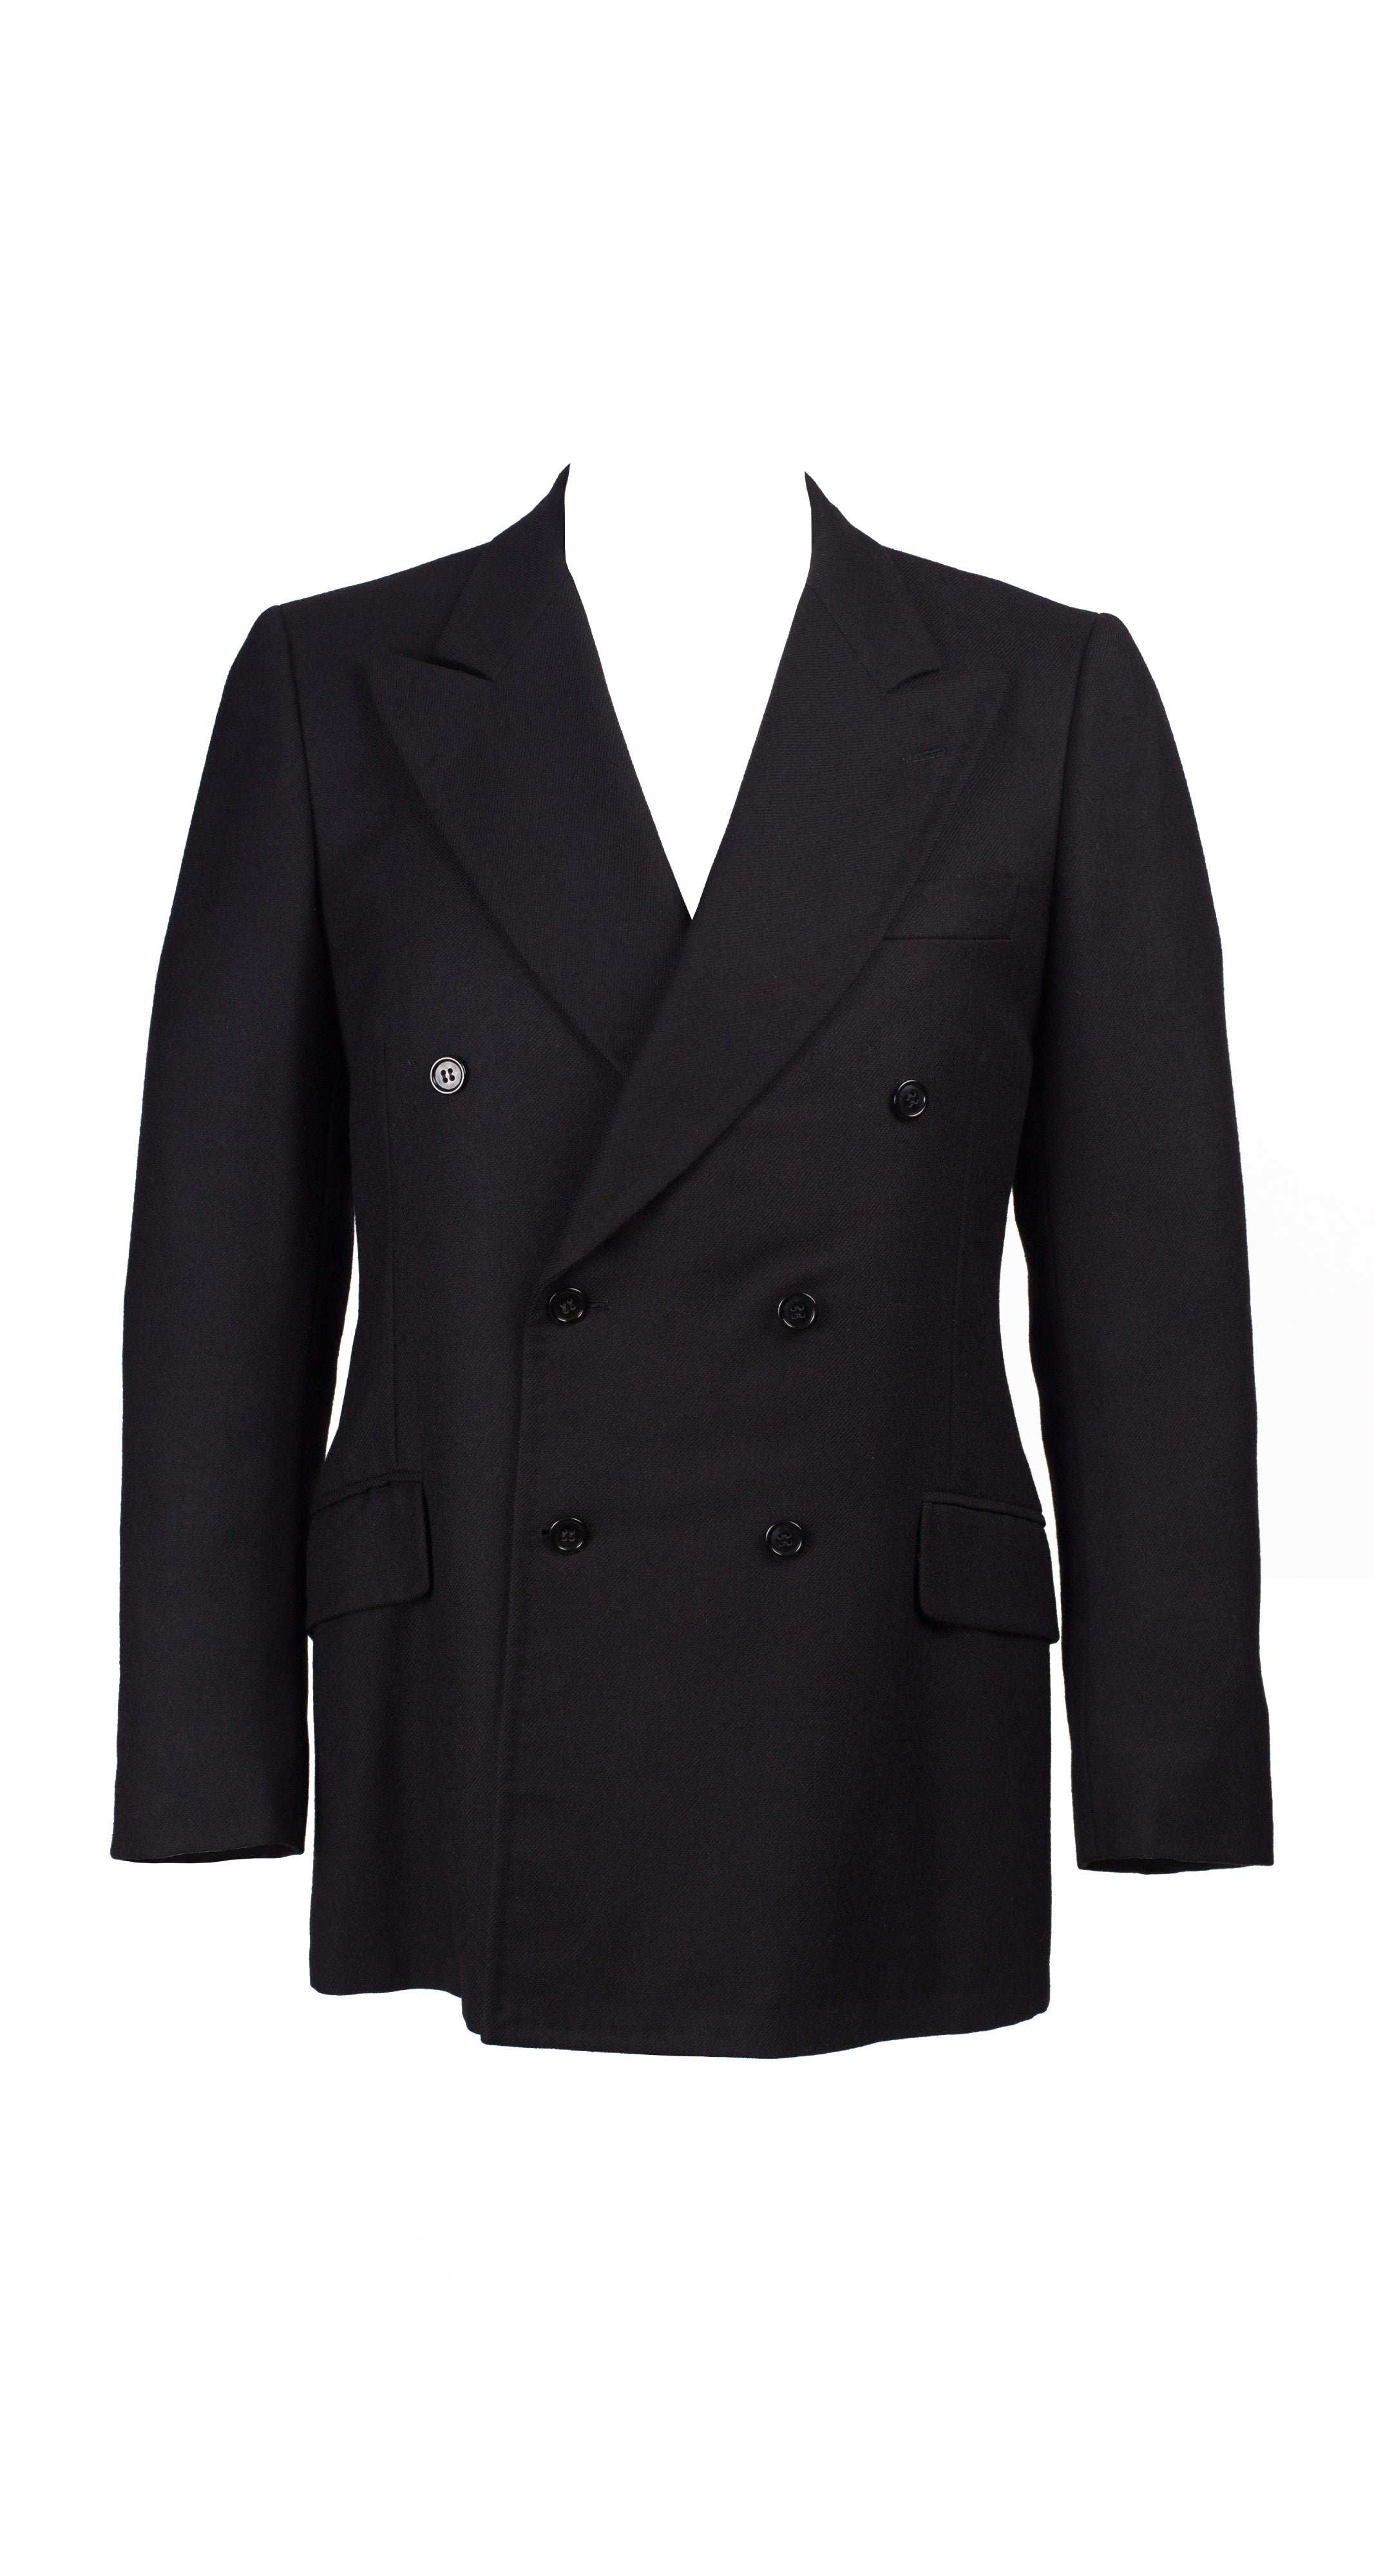 Valentino Uomo 1970s Men's Black Wool Double-Breasted Suit Jacket ...